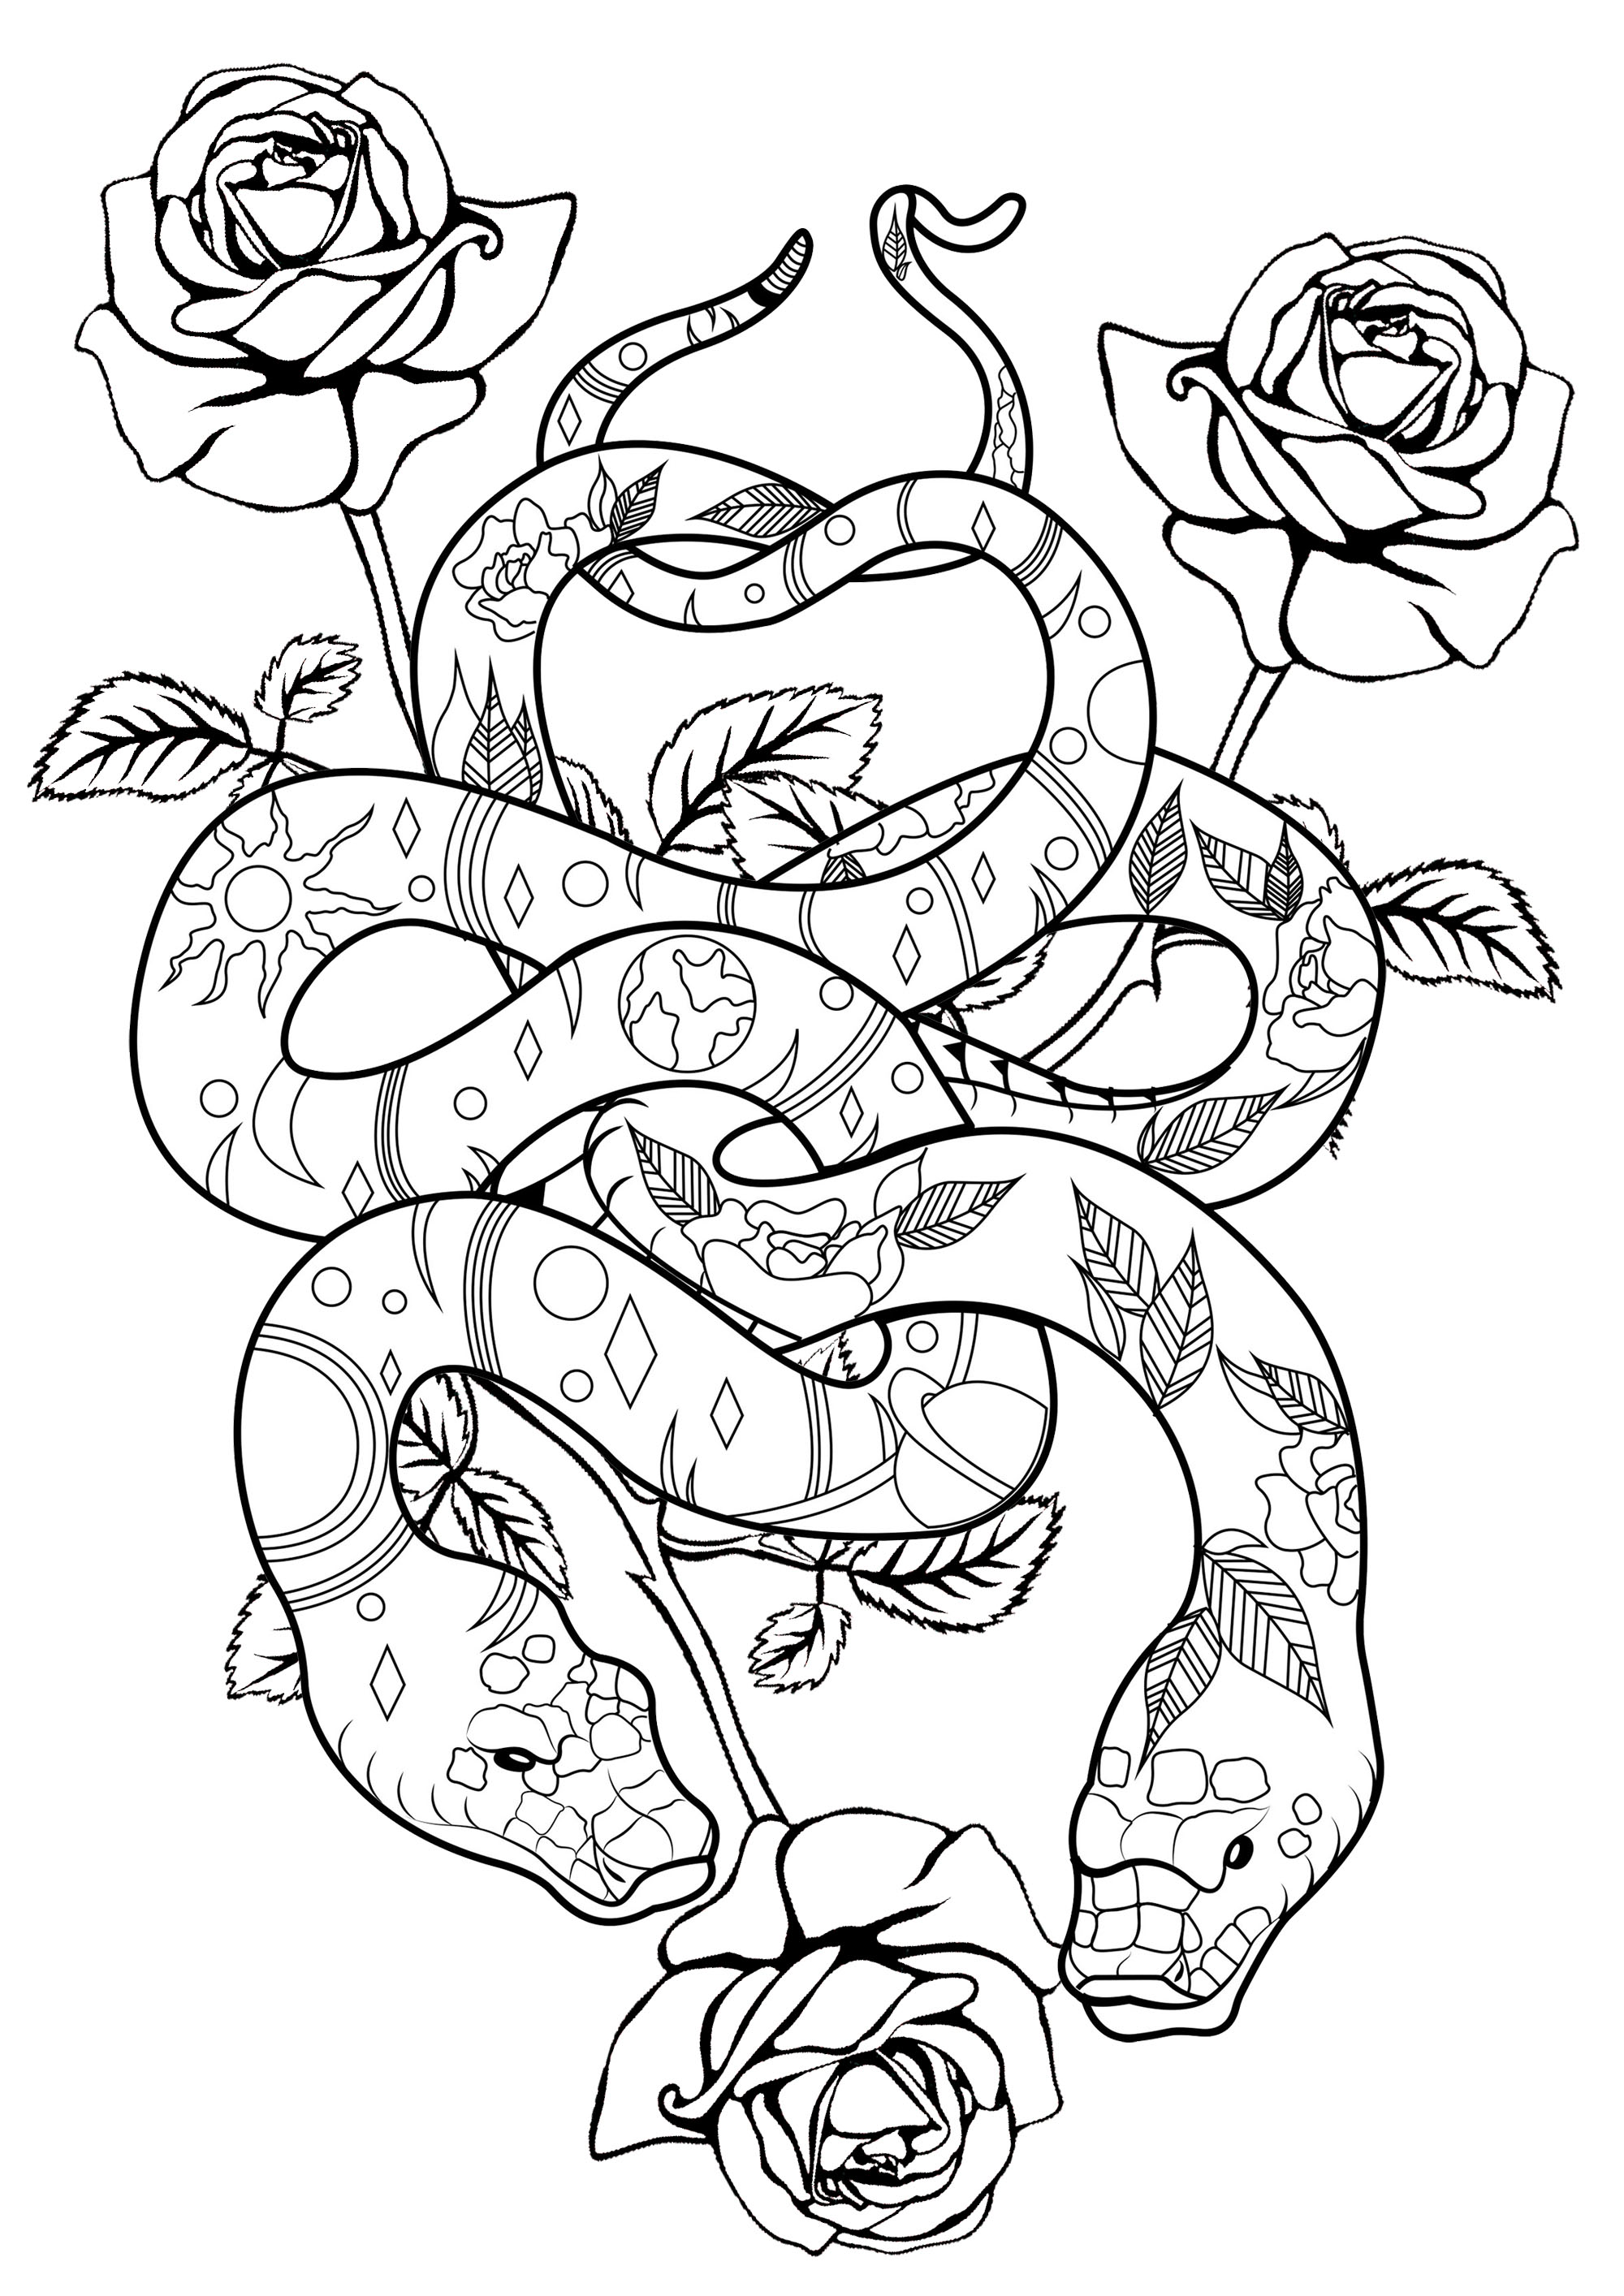 Cool Snakes Coloring Pages   Coloring Home